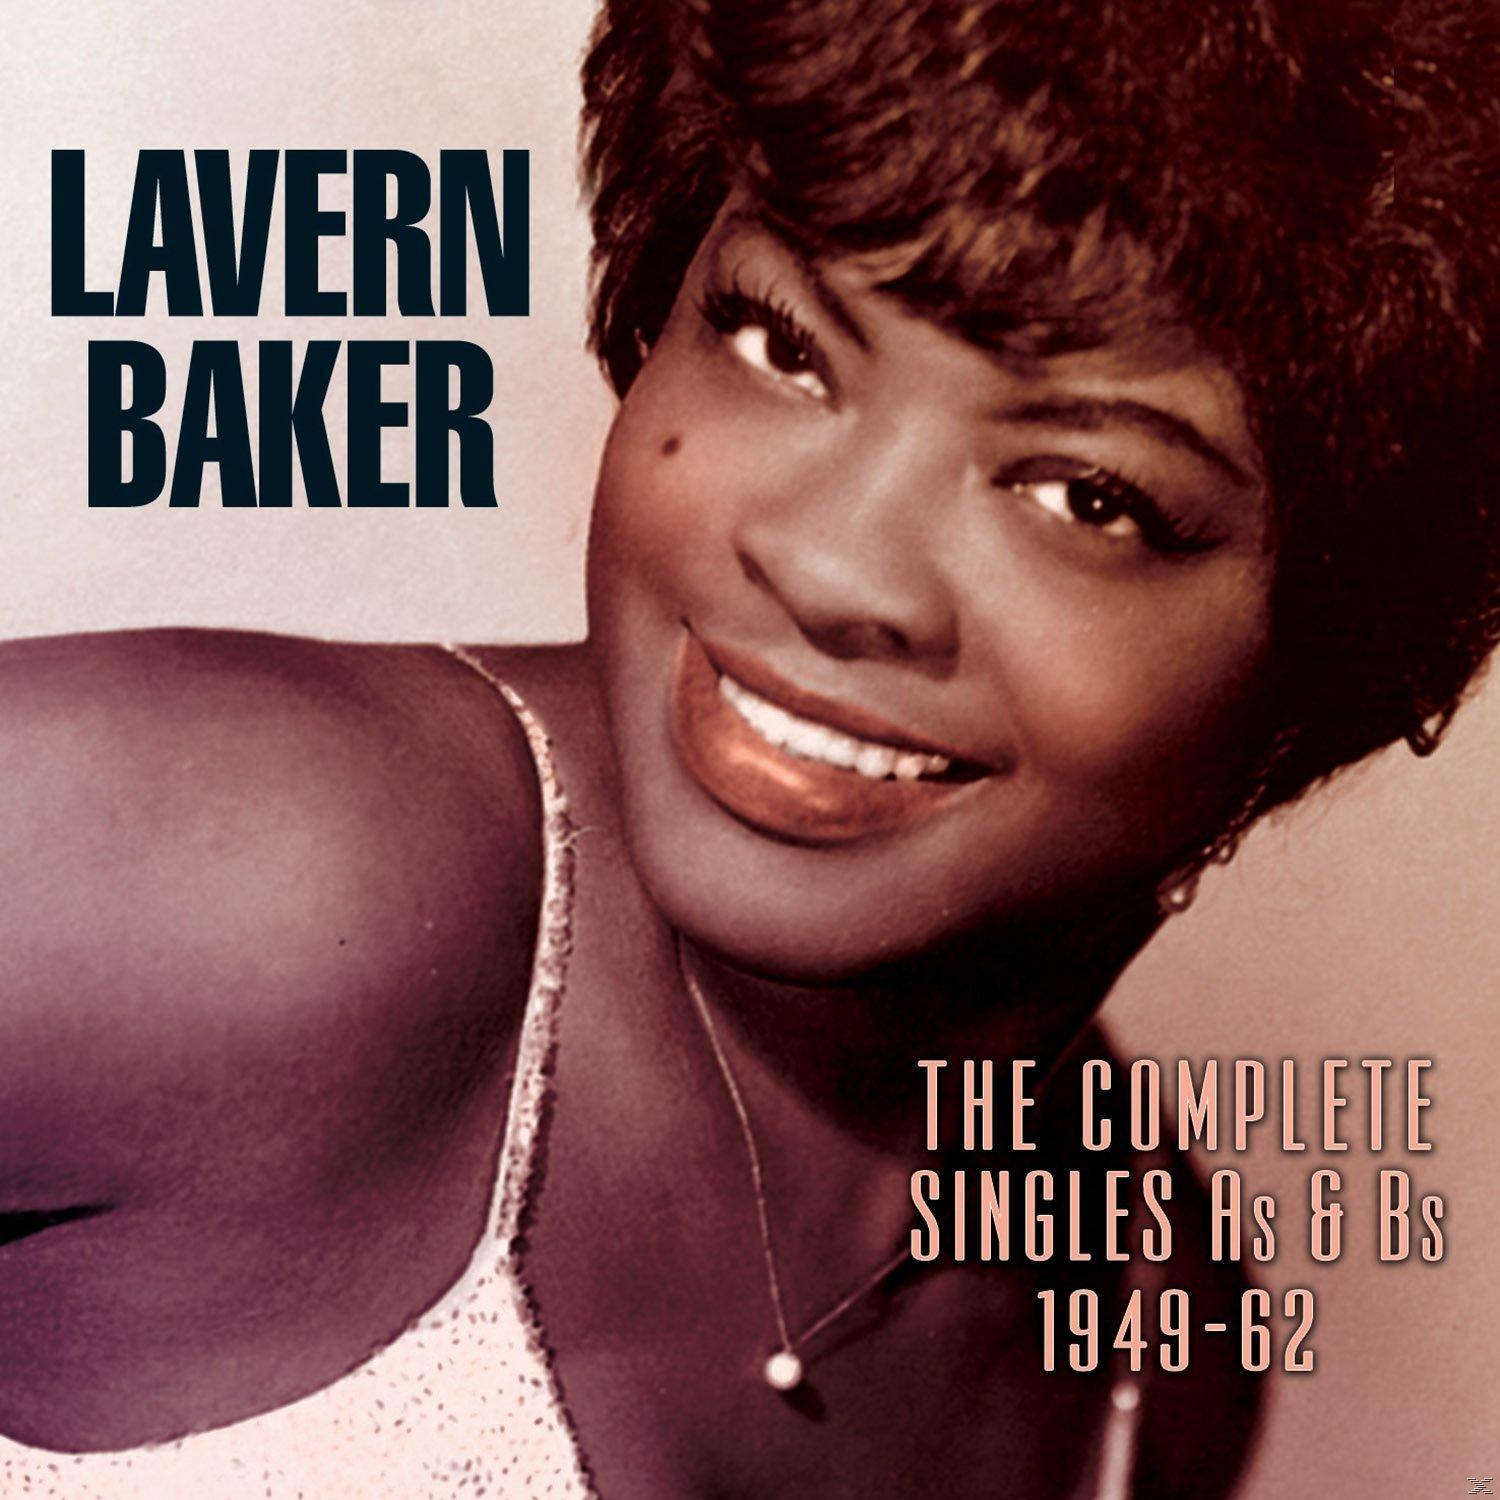 The LaVern - (CD) & Bs Complete Baker - Singles 1949-62 As